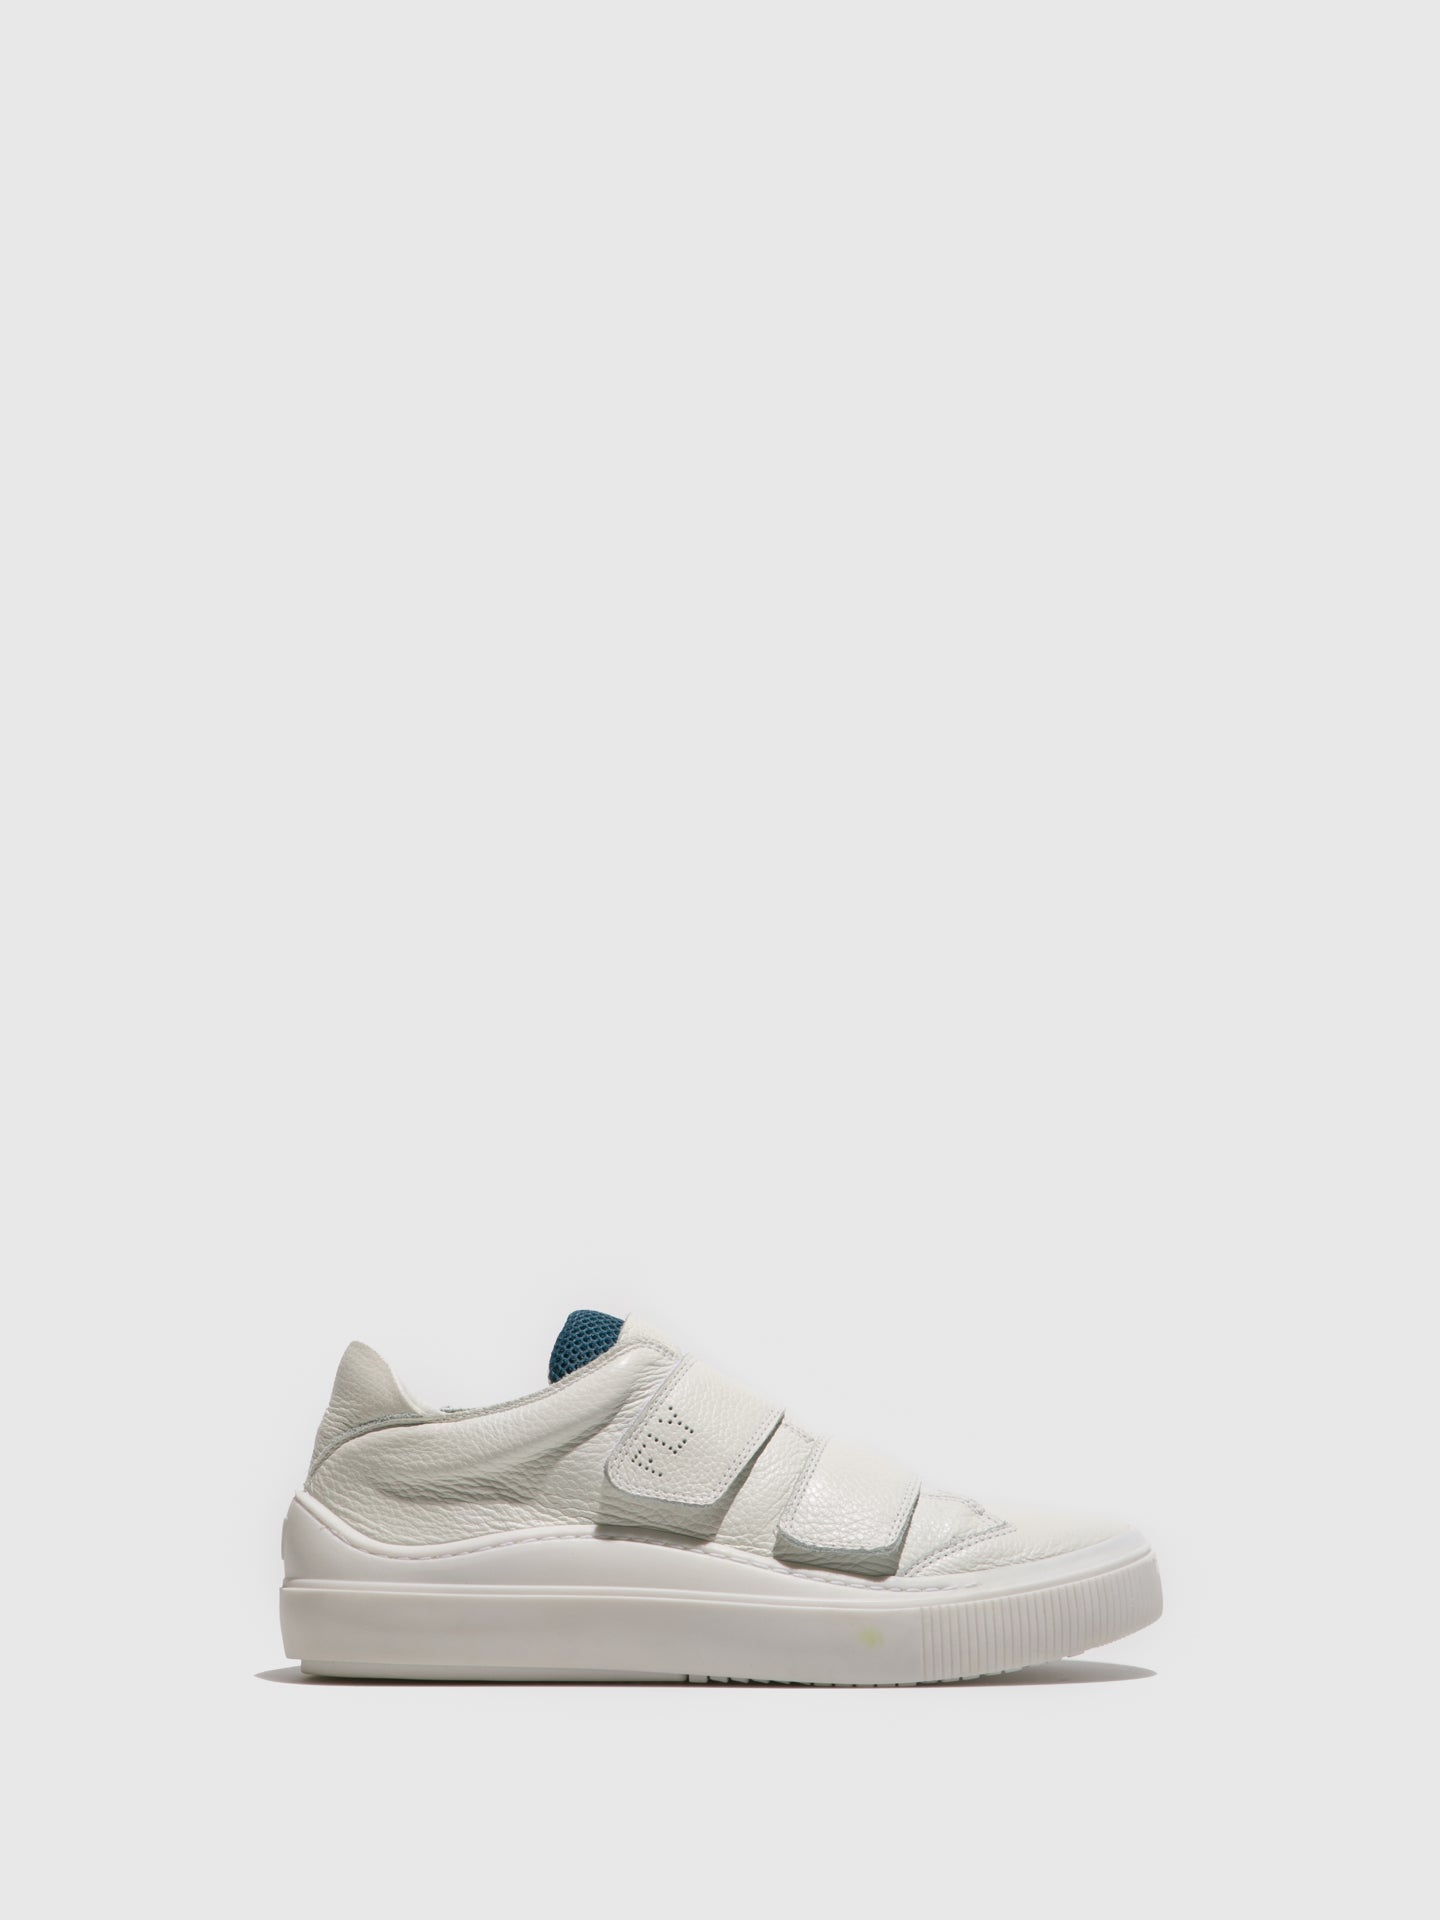 Fly London Velcro Trainers SEVU416FLY White